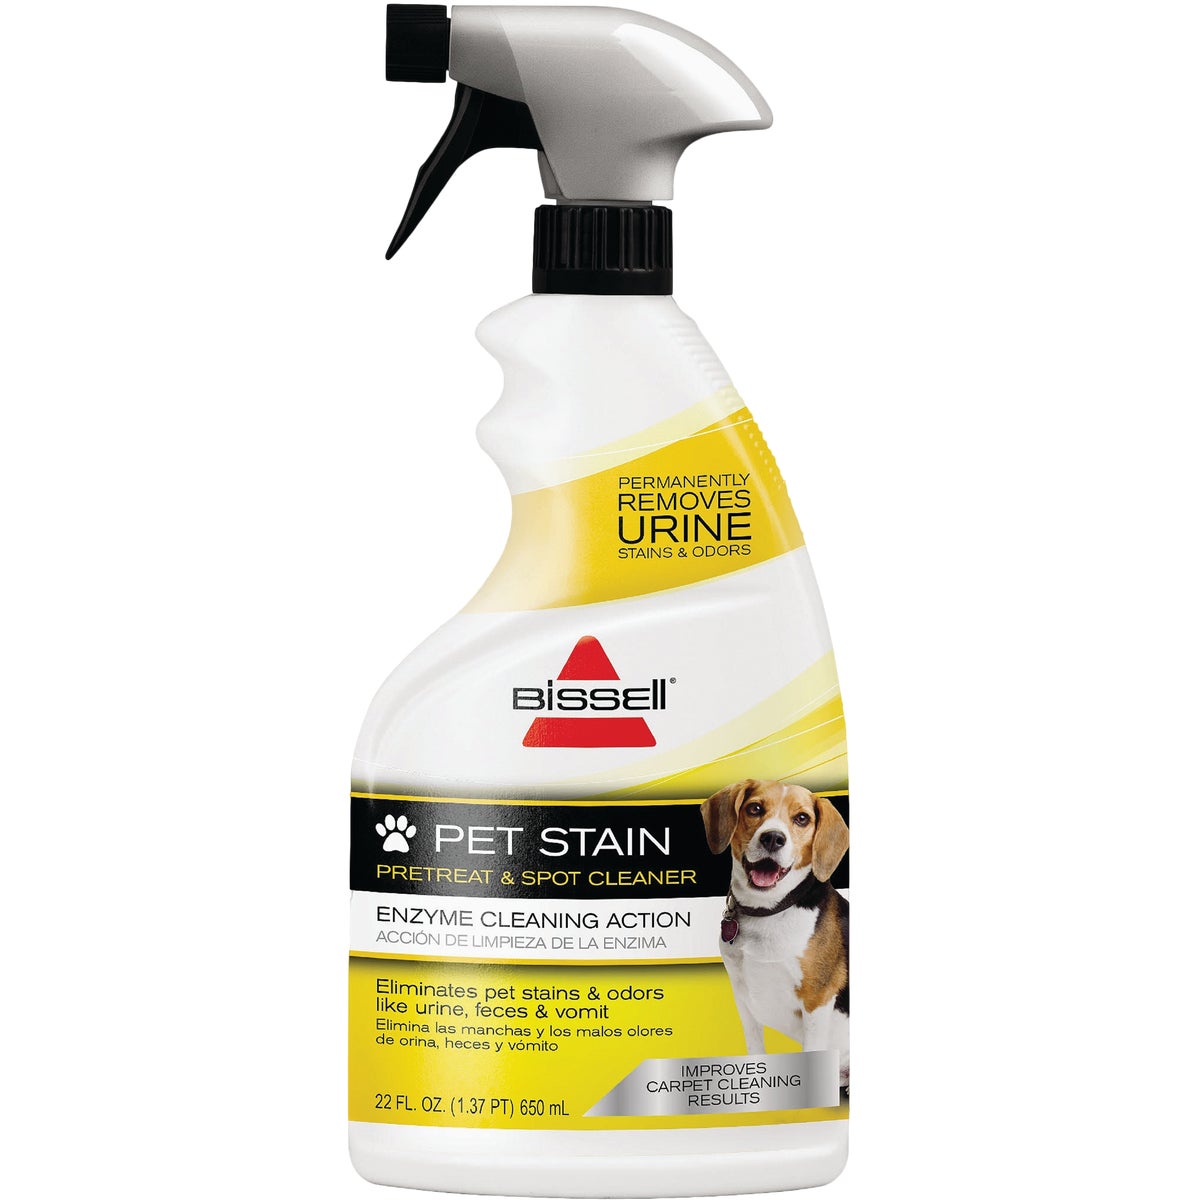 Item 600247, Eliminates pet odors and stains on carpet &amp; upholstery like urine, 